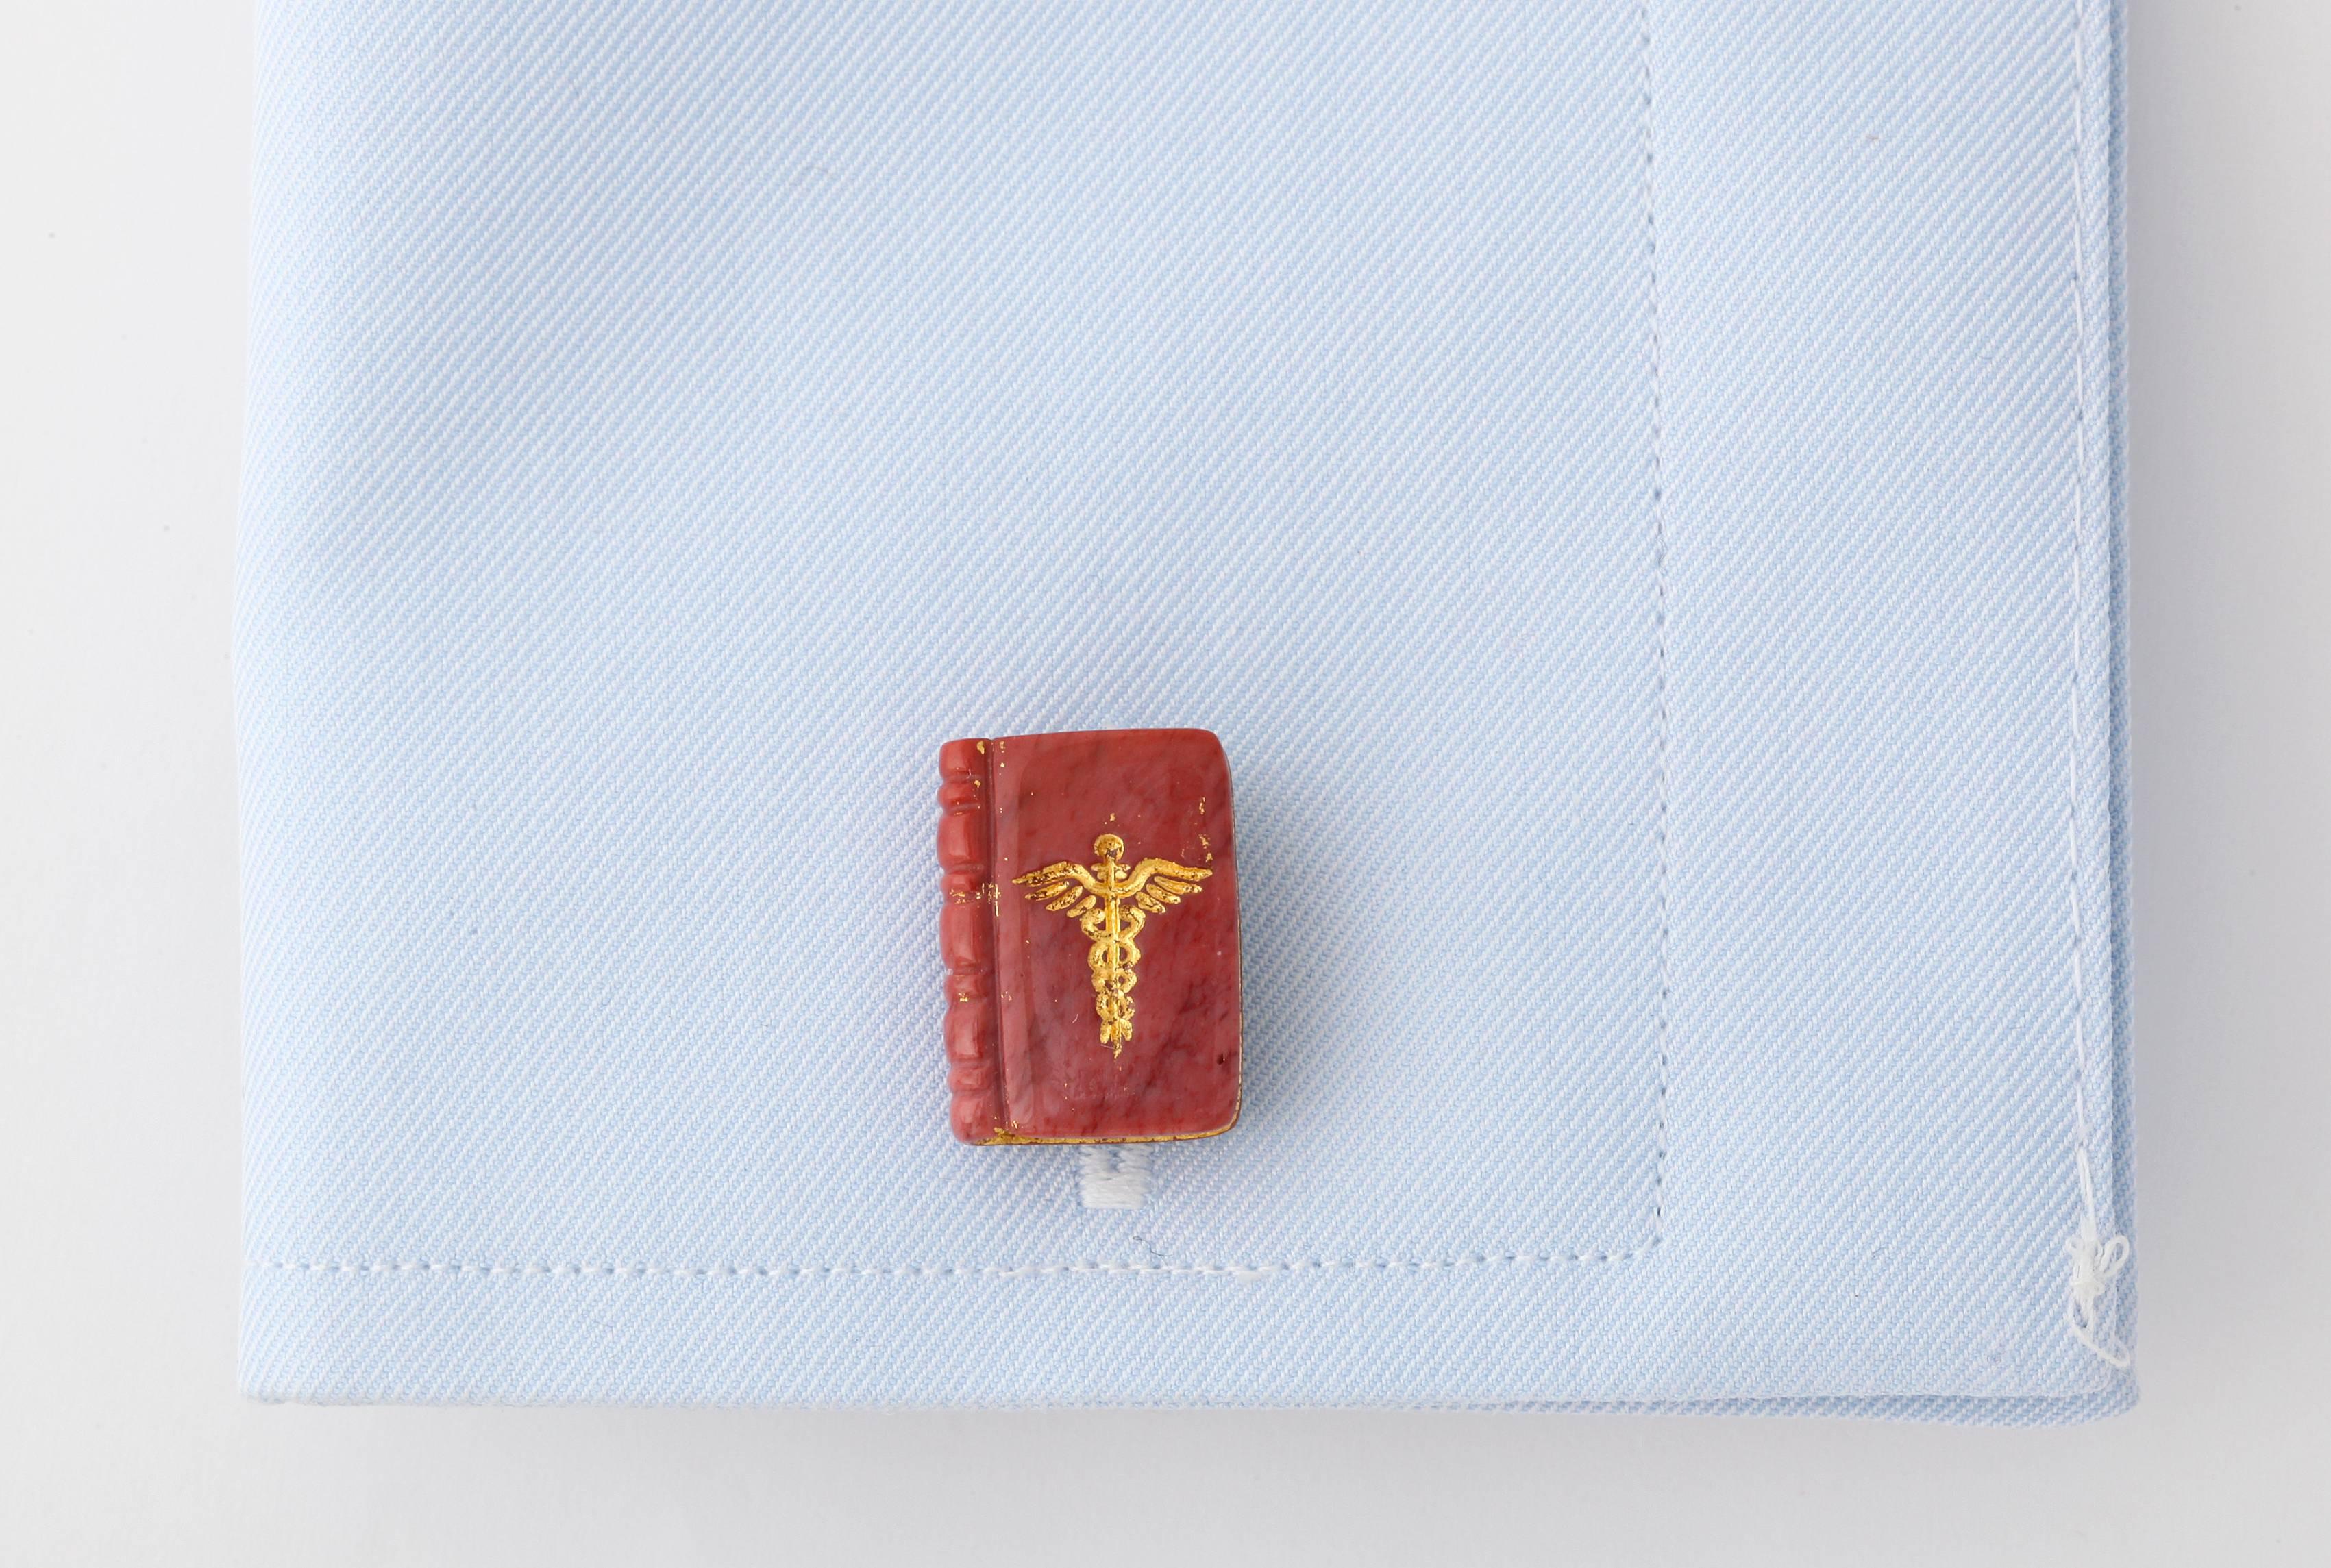 For the stylish doctor, these book cufflinks are meticulously carved from brown jasper and then inlaid with 22kt gold.  Discreet, yet highly elegant.

Designs by Michael Kanners have been described by Departures Magazine as, 